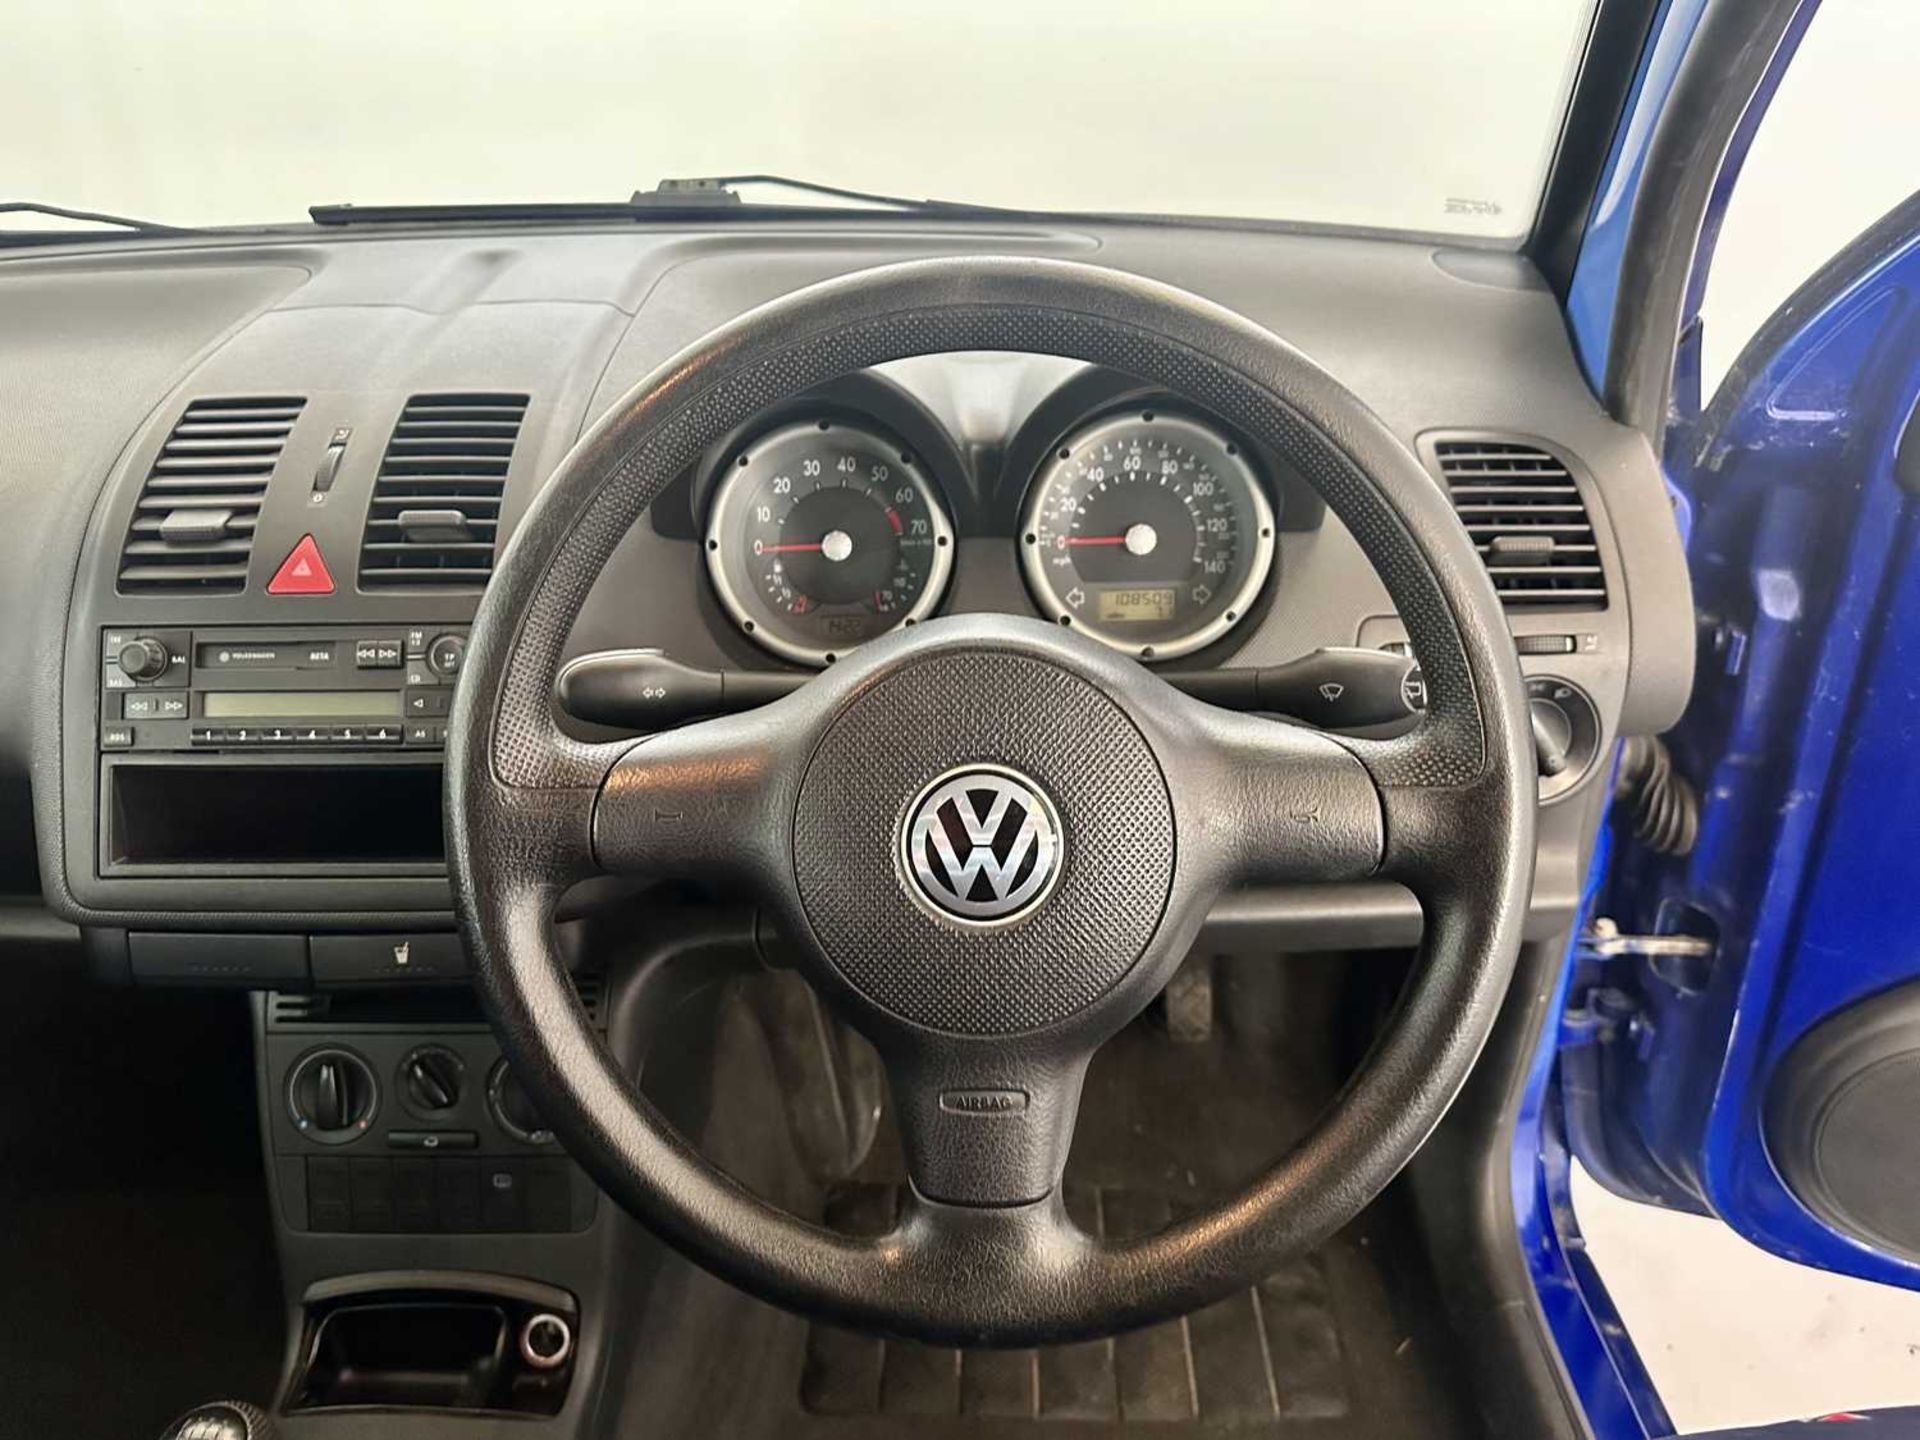 2002 Volkswagen Lupo - Image 23 of 28